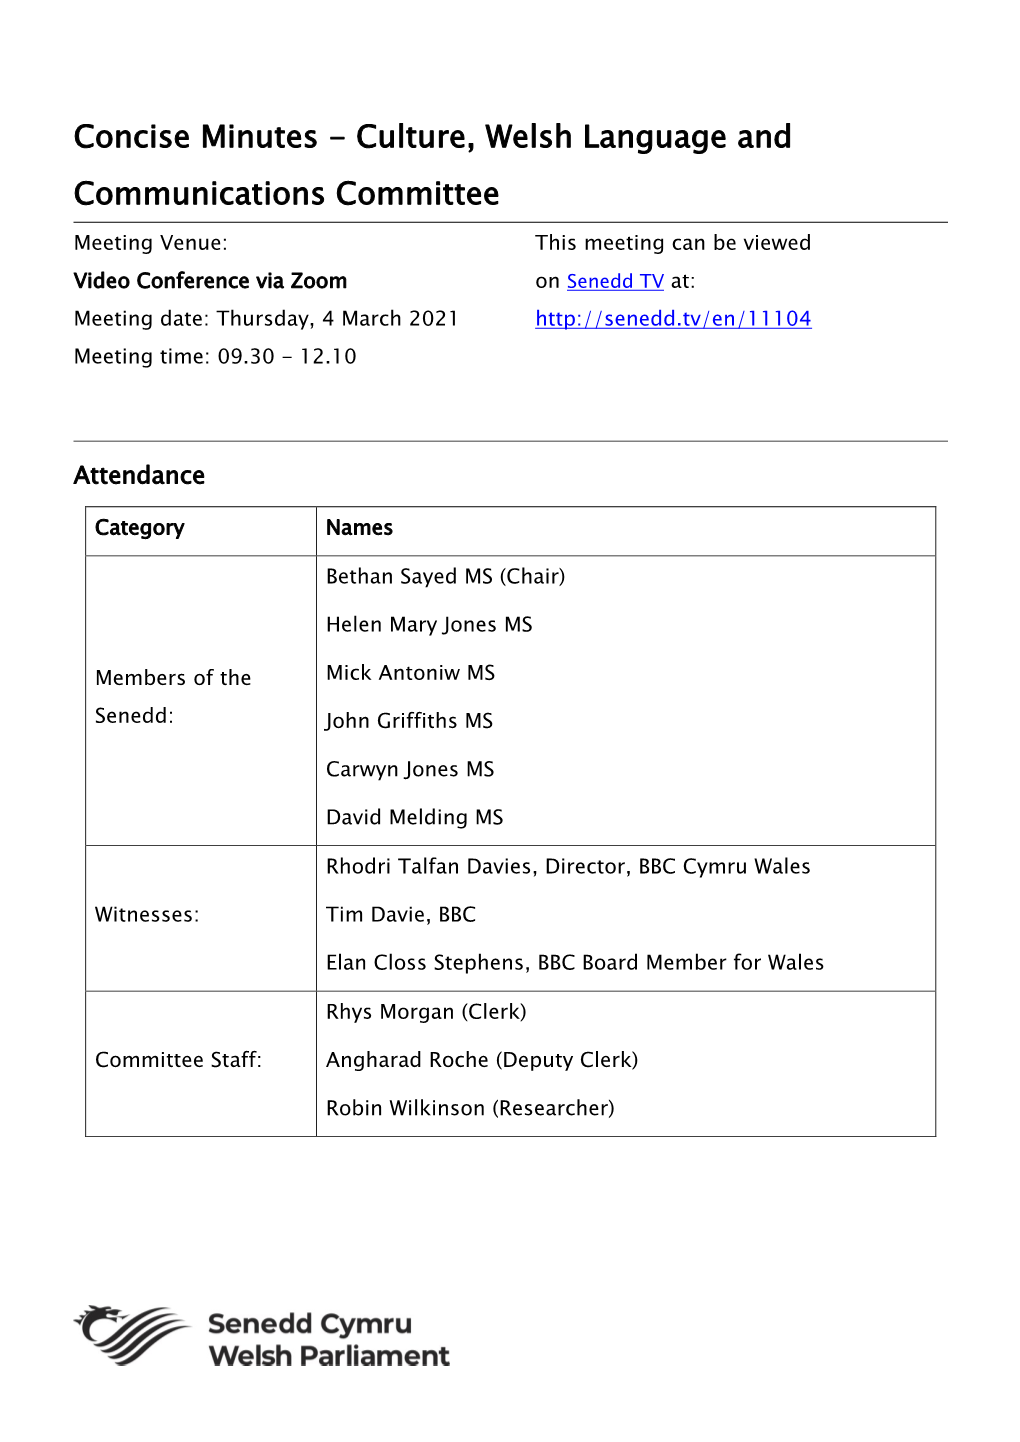 Concise Minutes - Culture, Welsh Language and Communications Committee